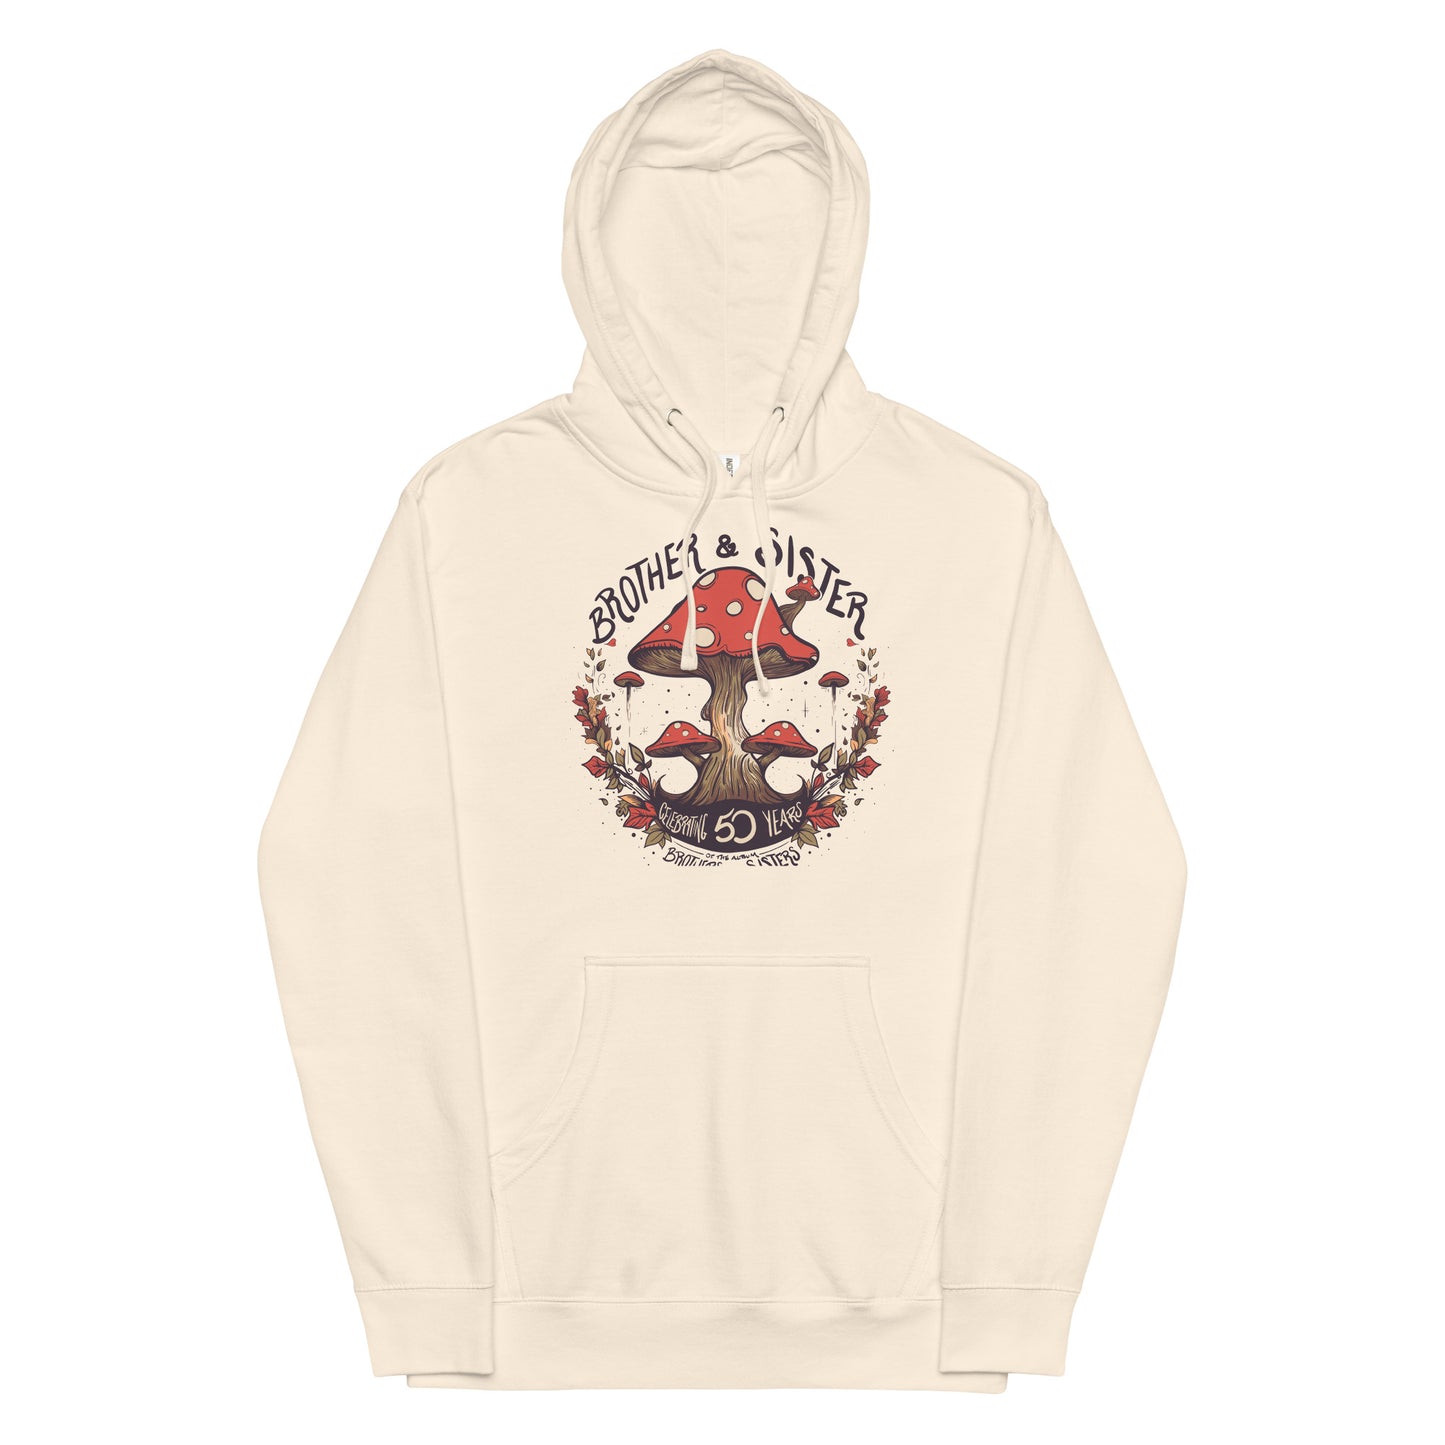 50 Years of Brothers and Sisters hoodie - Designed by Jimmy Rector